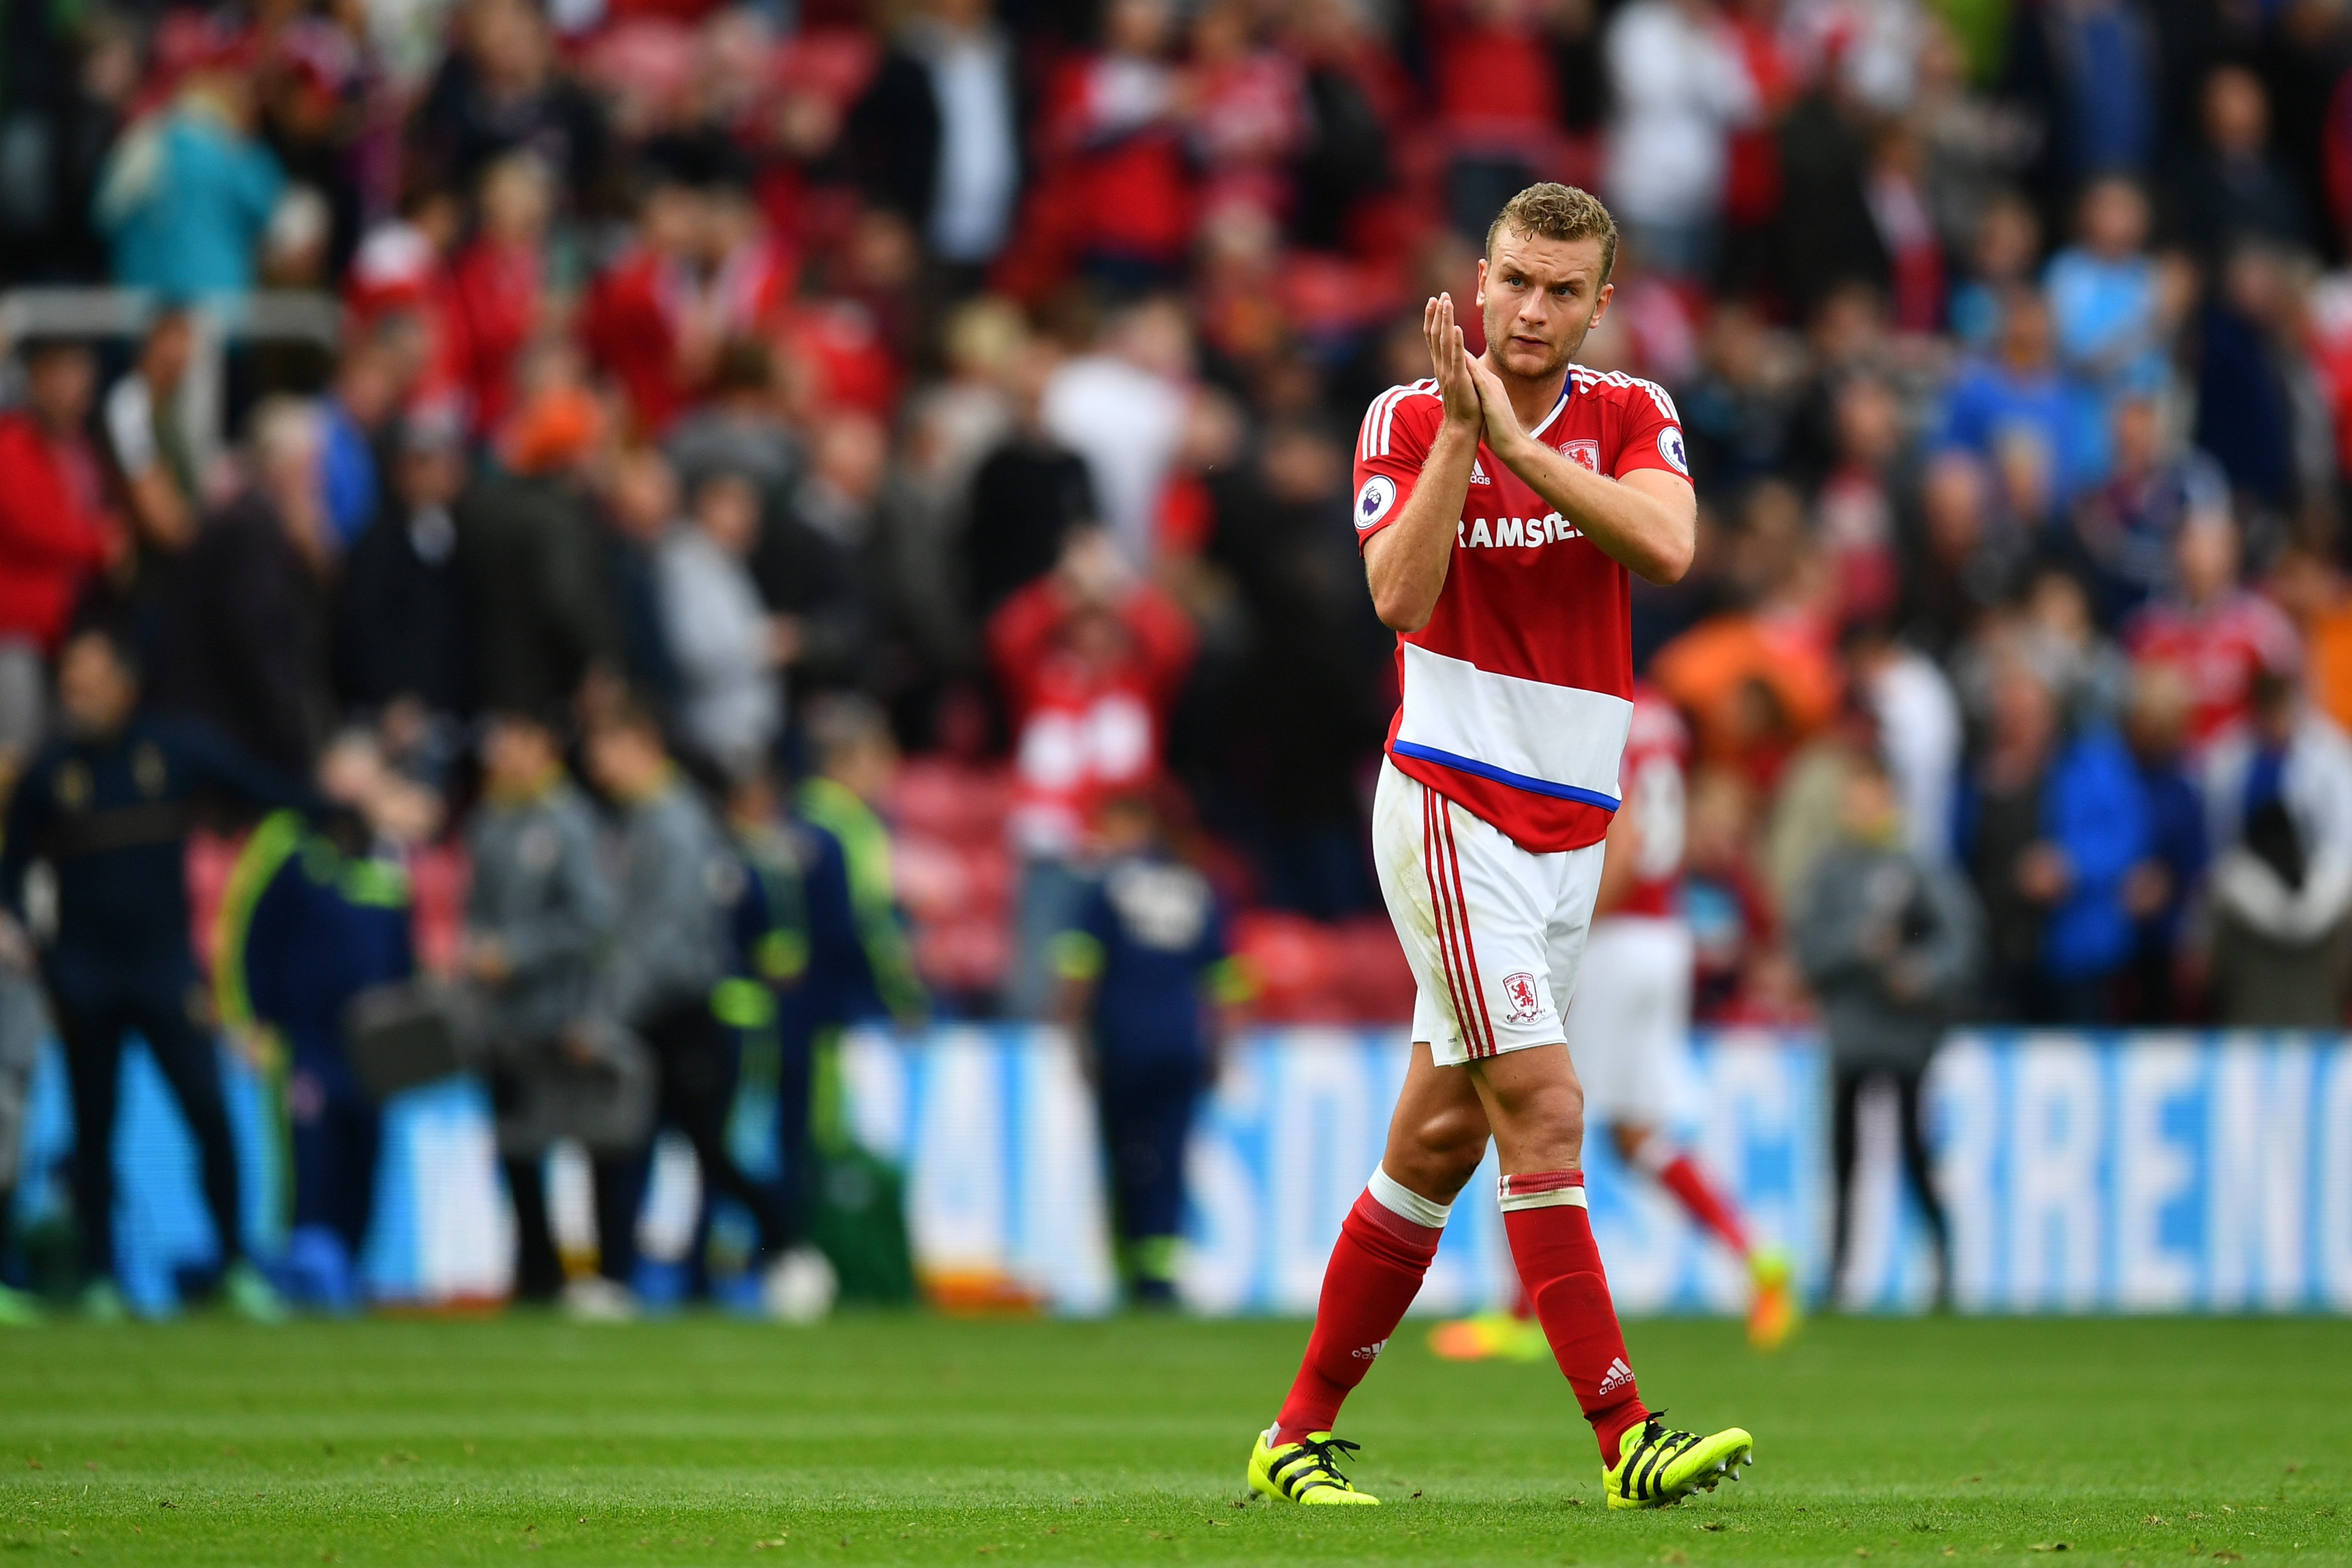 MIDDLESBROUGH, ENGLAND - SEPTEMBER 24:  Ben Gibson of Middlesbrough claps the fans after the game during the Premier League match between Middlesbrough and Tottenham Hotspur at the Riverside Stadium on September 24, 2016 in Middlesbrough, England.  (Photo by Dan Mullan/Getty Images)